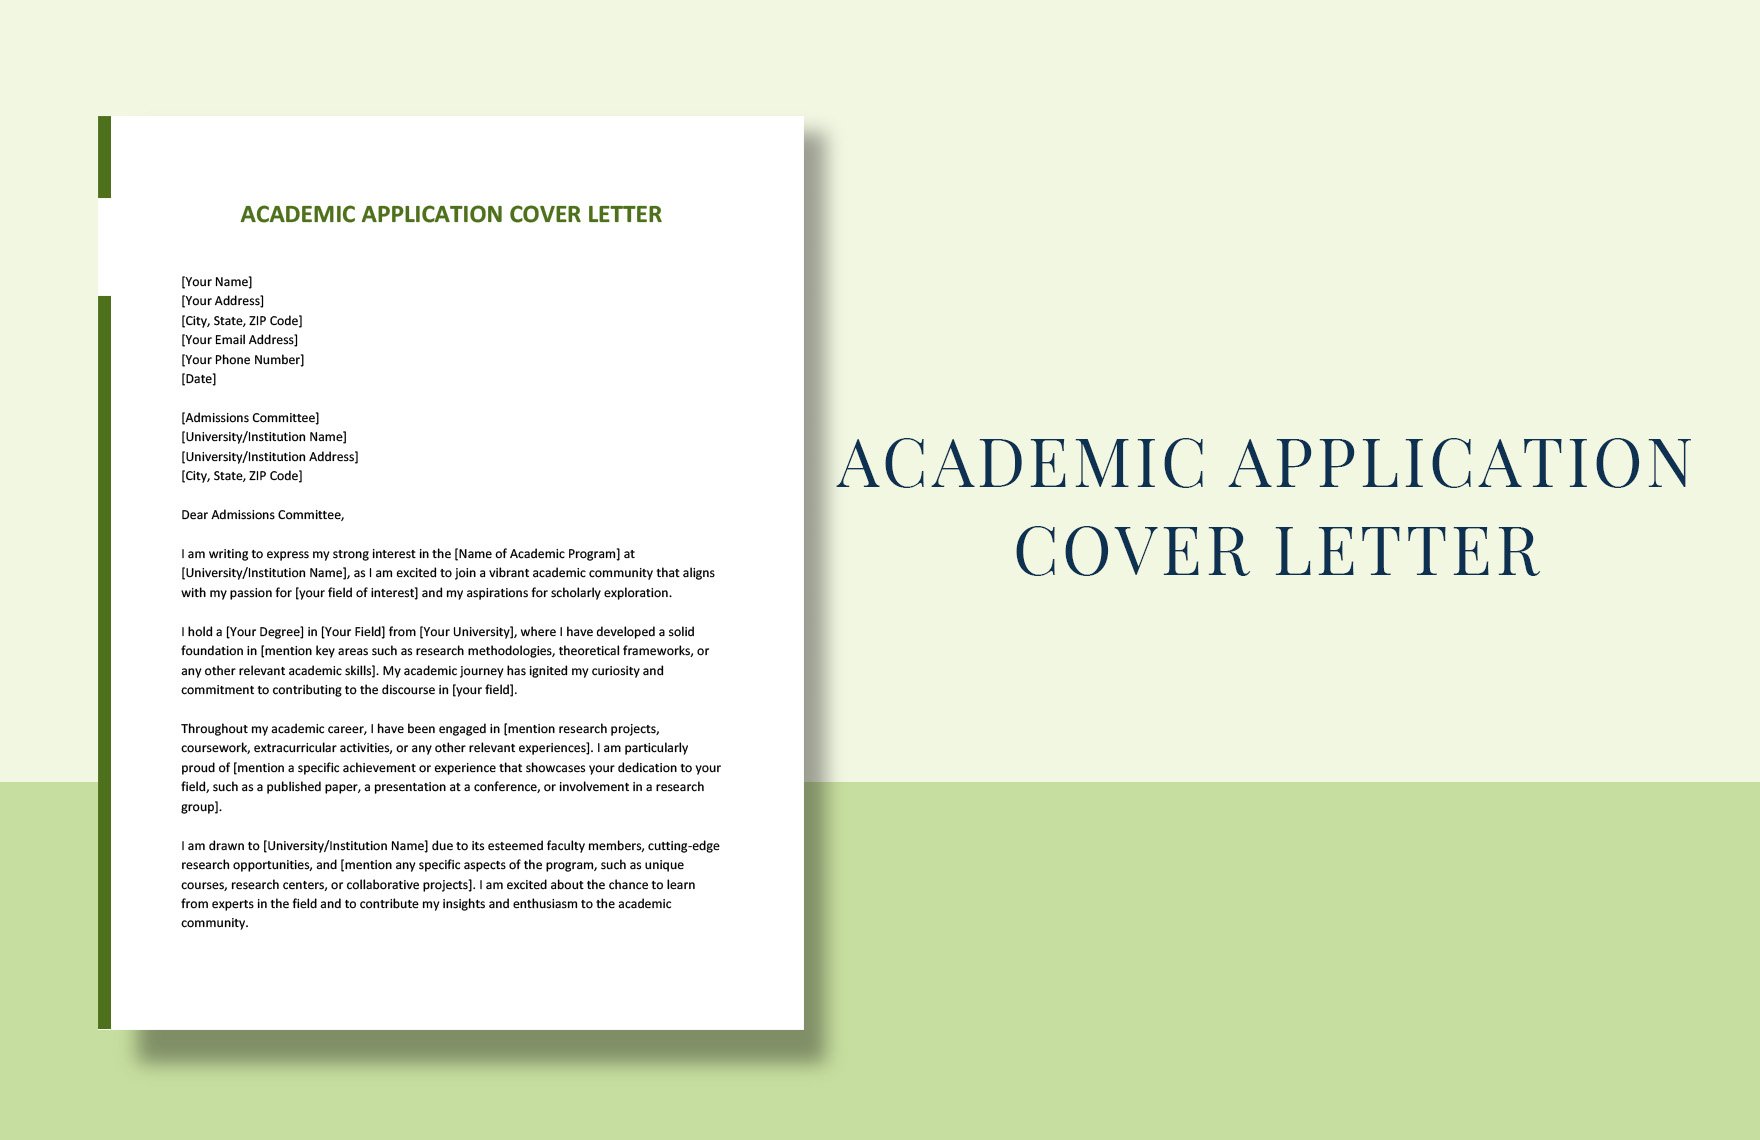 Academic Application Cover Letter